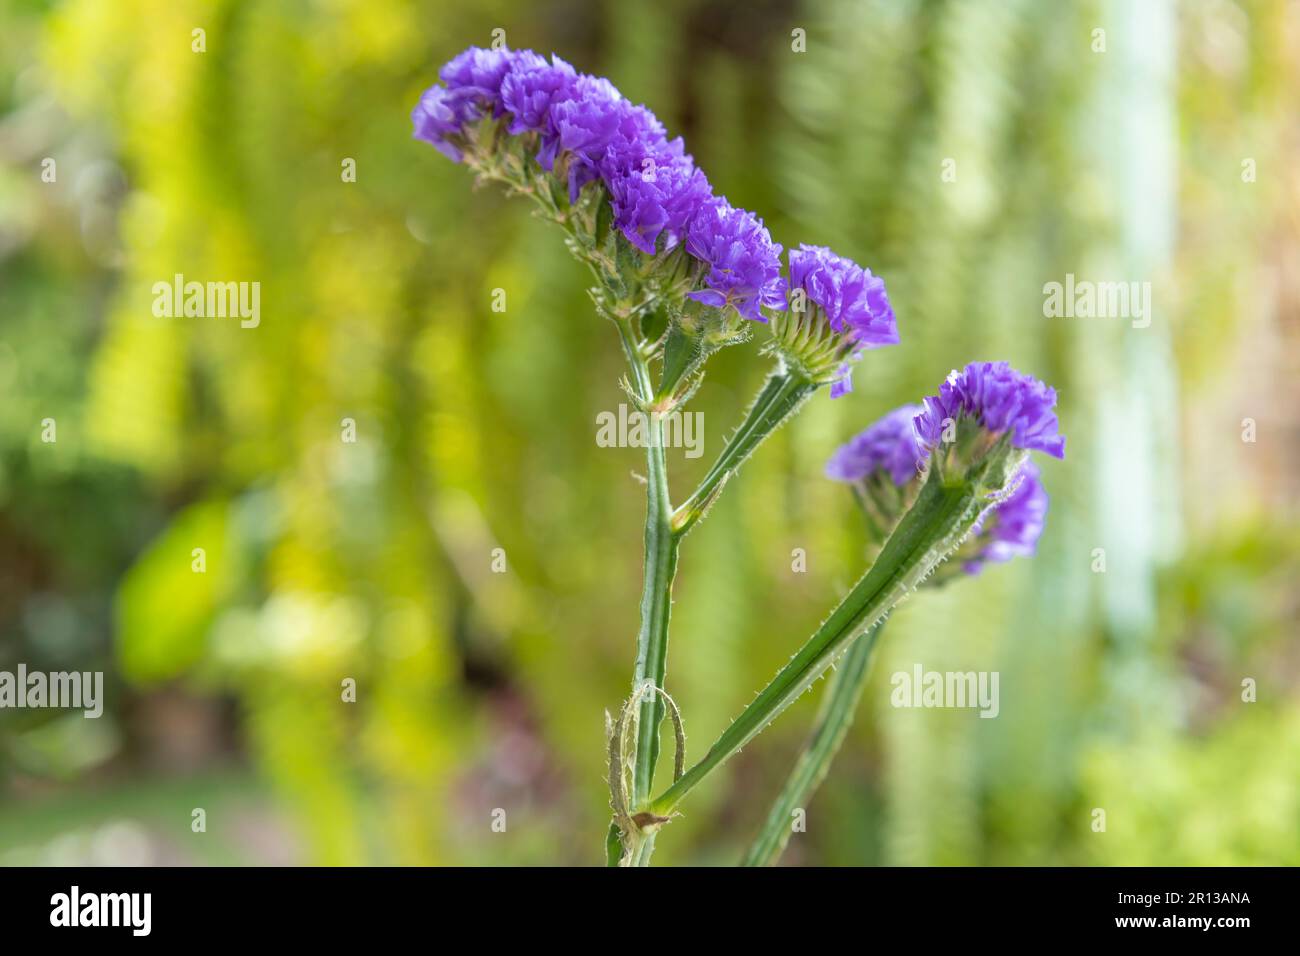 Limonium sinuatum, commonly known as wavyleaf sea lavender with blur background Stock Photo